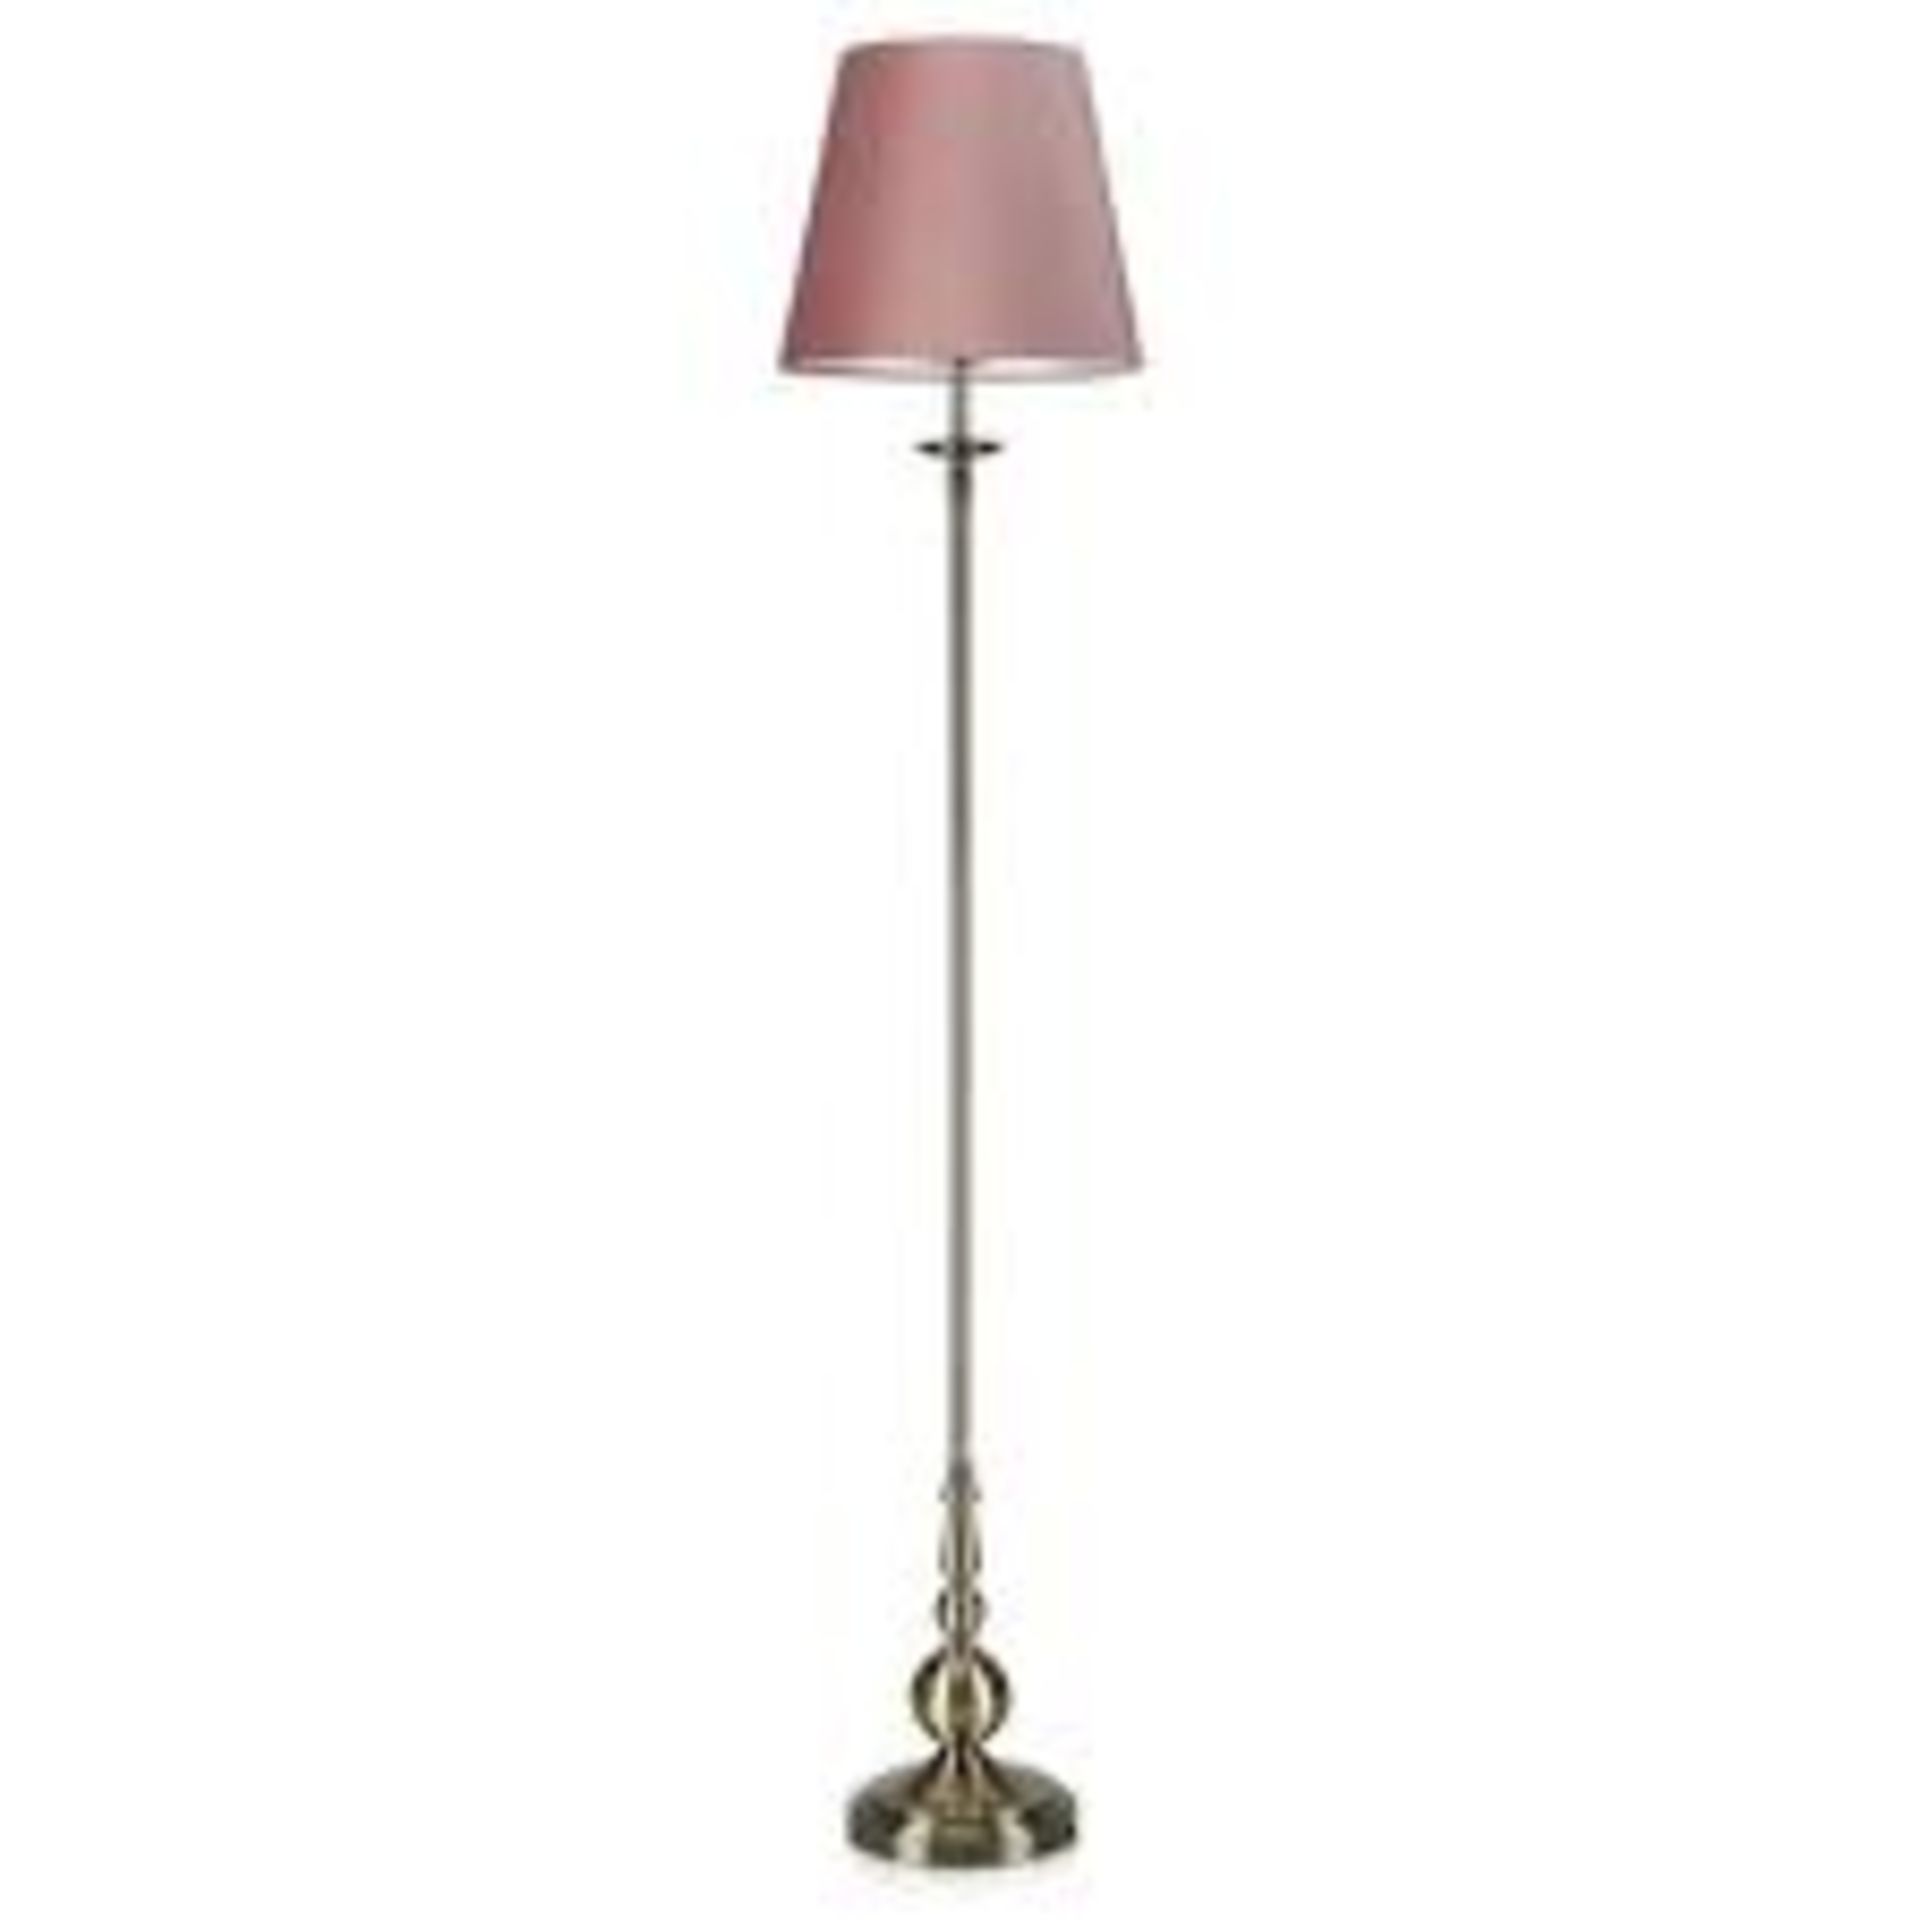 Boxed Markslojd Abbey Floor Lamp RRP £130 (17105) (10.01.20) (Public Viewing and Appraisals